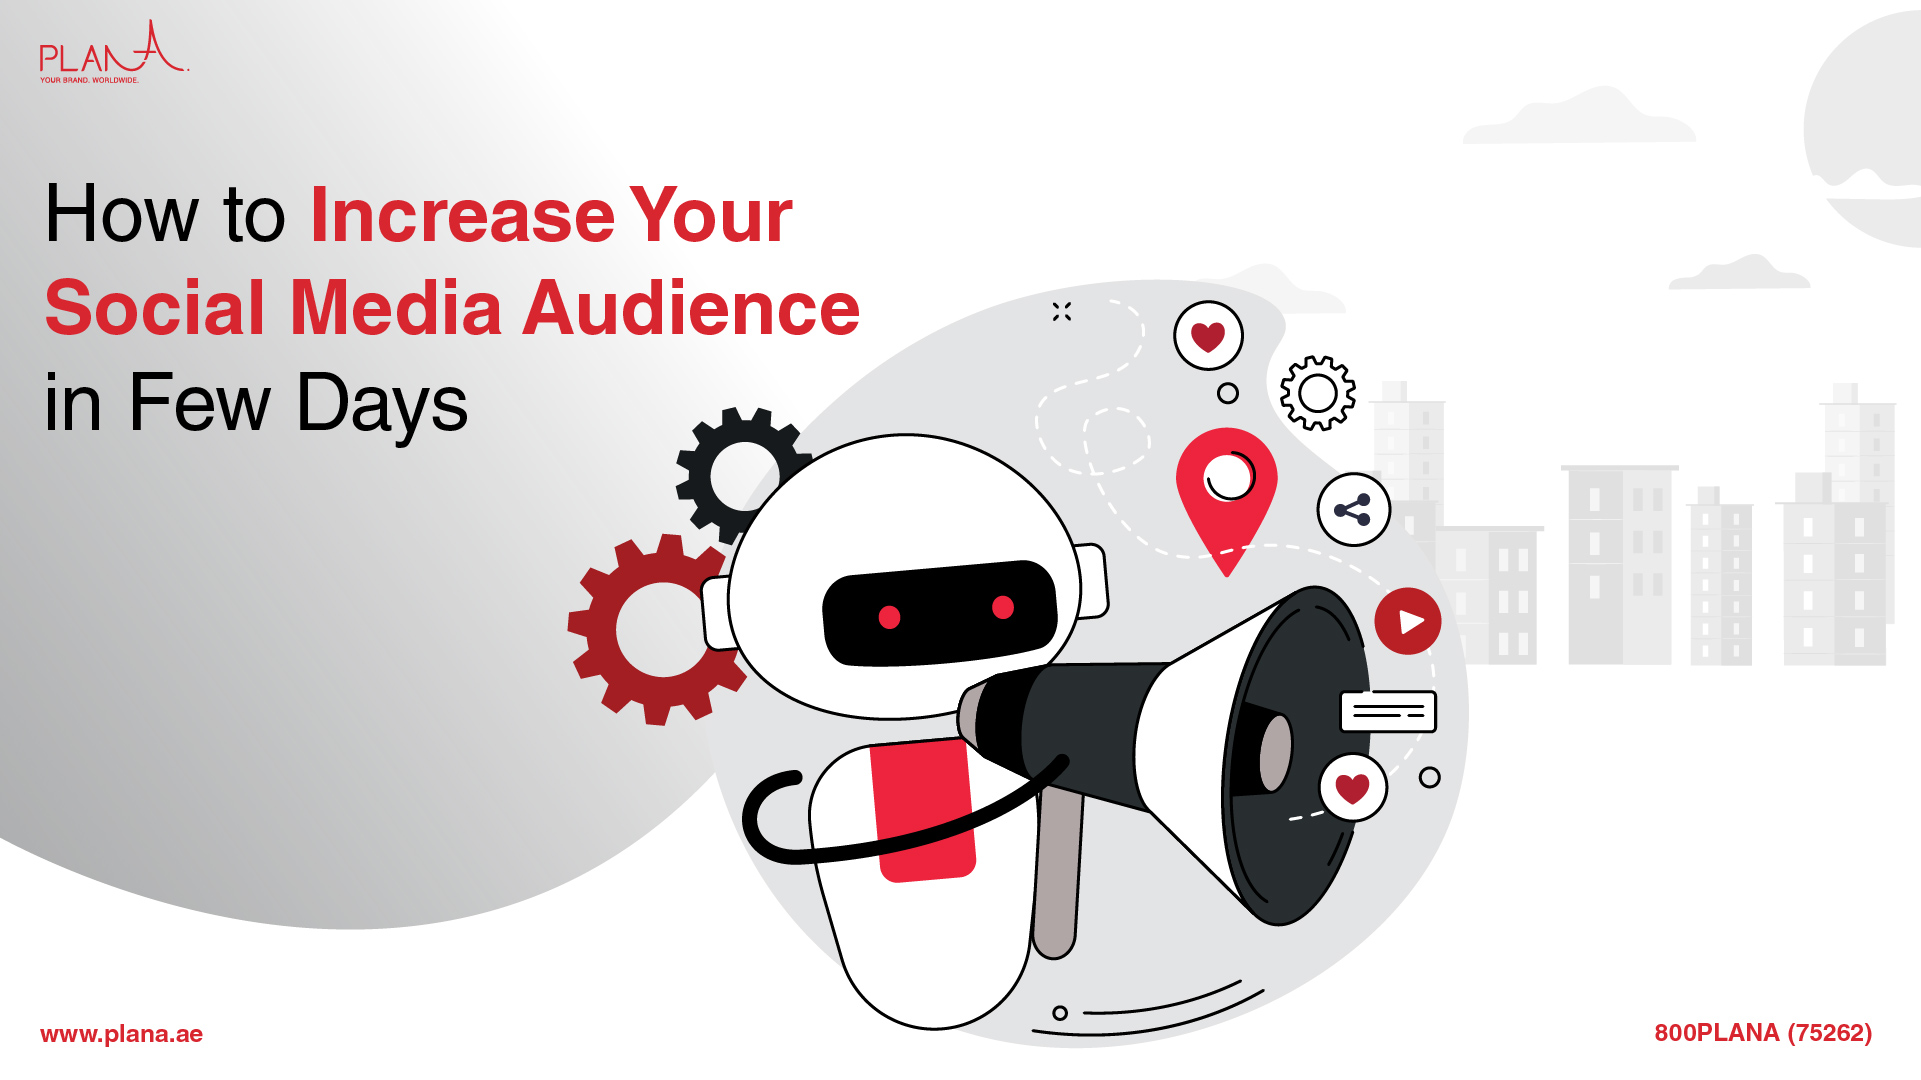 How to Increase Your Social Media Audience in Few Days